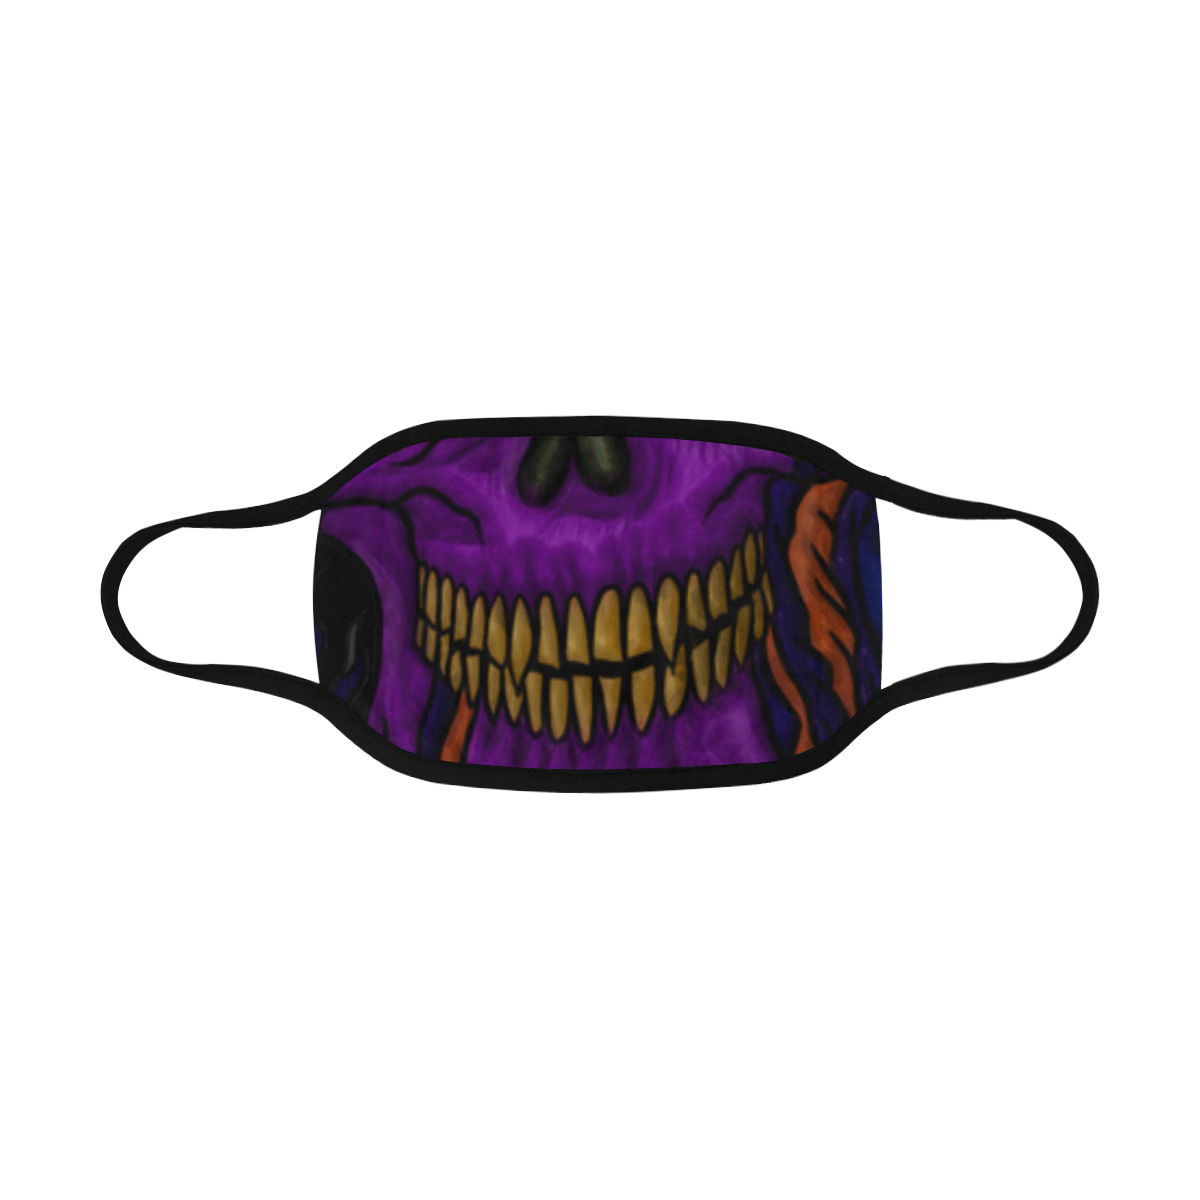 Funny Funky Sugar Skull Mouth Mask